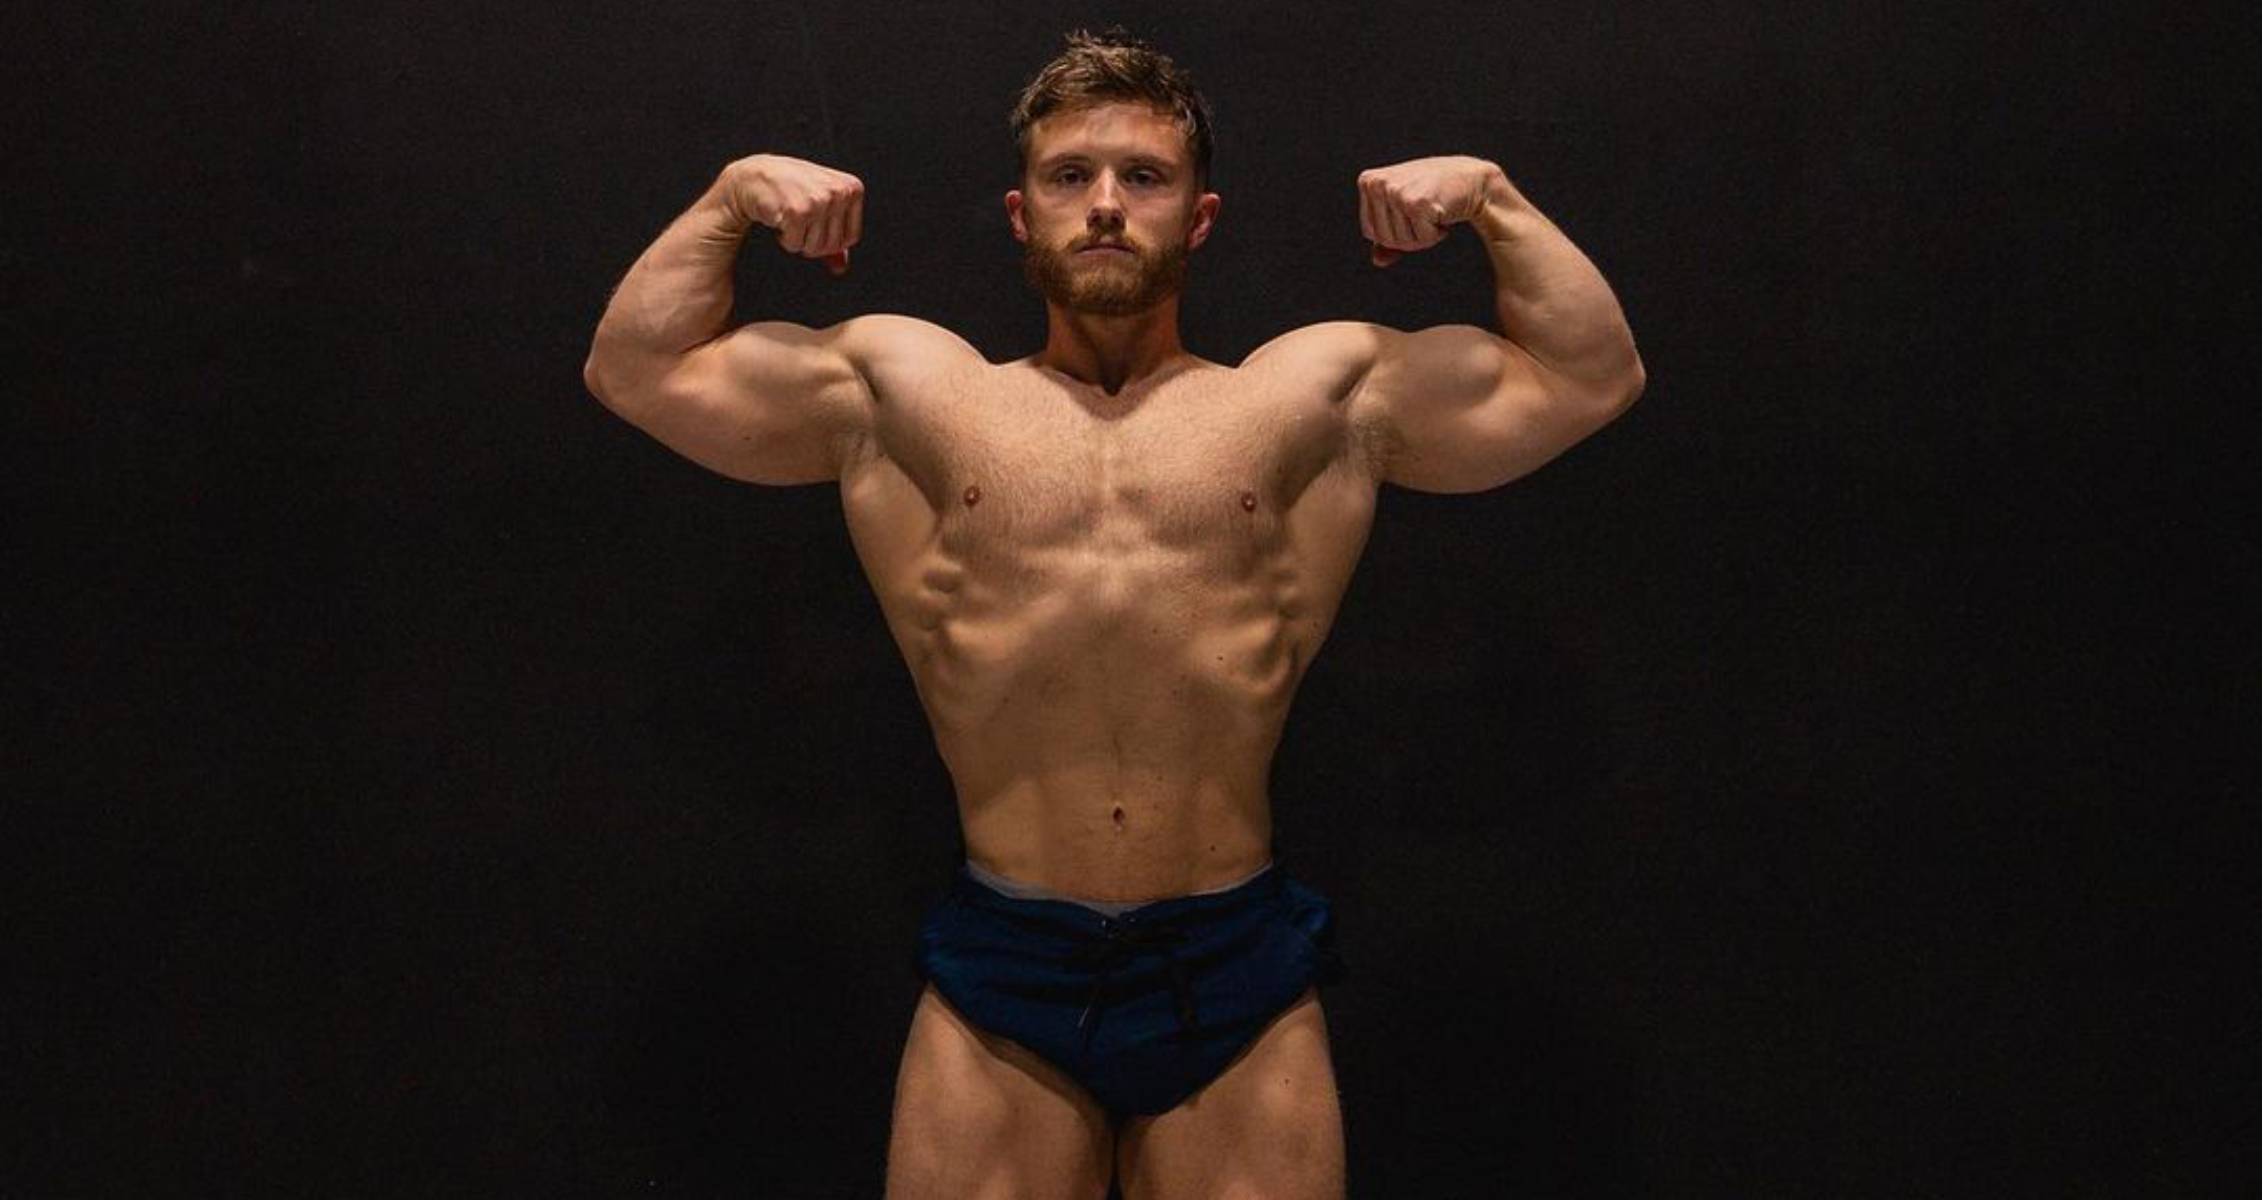 Why is the vacuum pose no longer performed on stage in modern bodybuilding  at the Mr. Olympia? - Quora